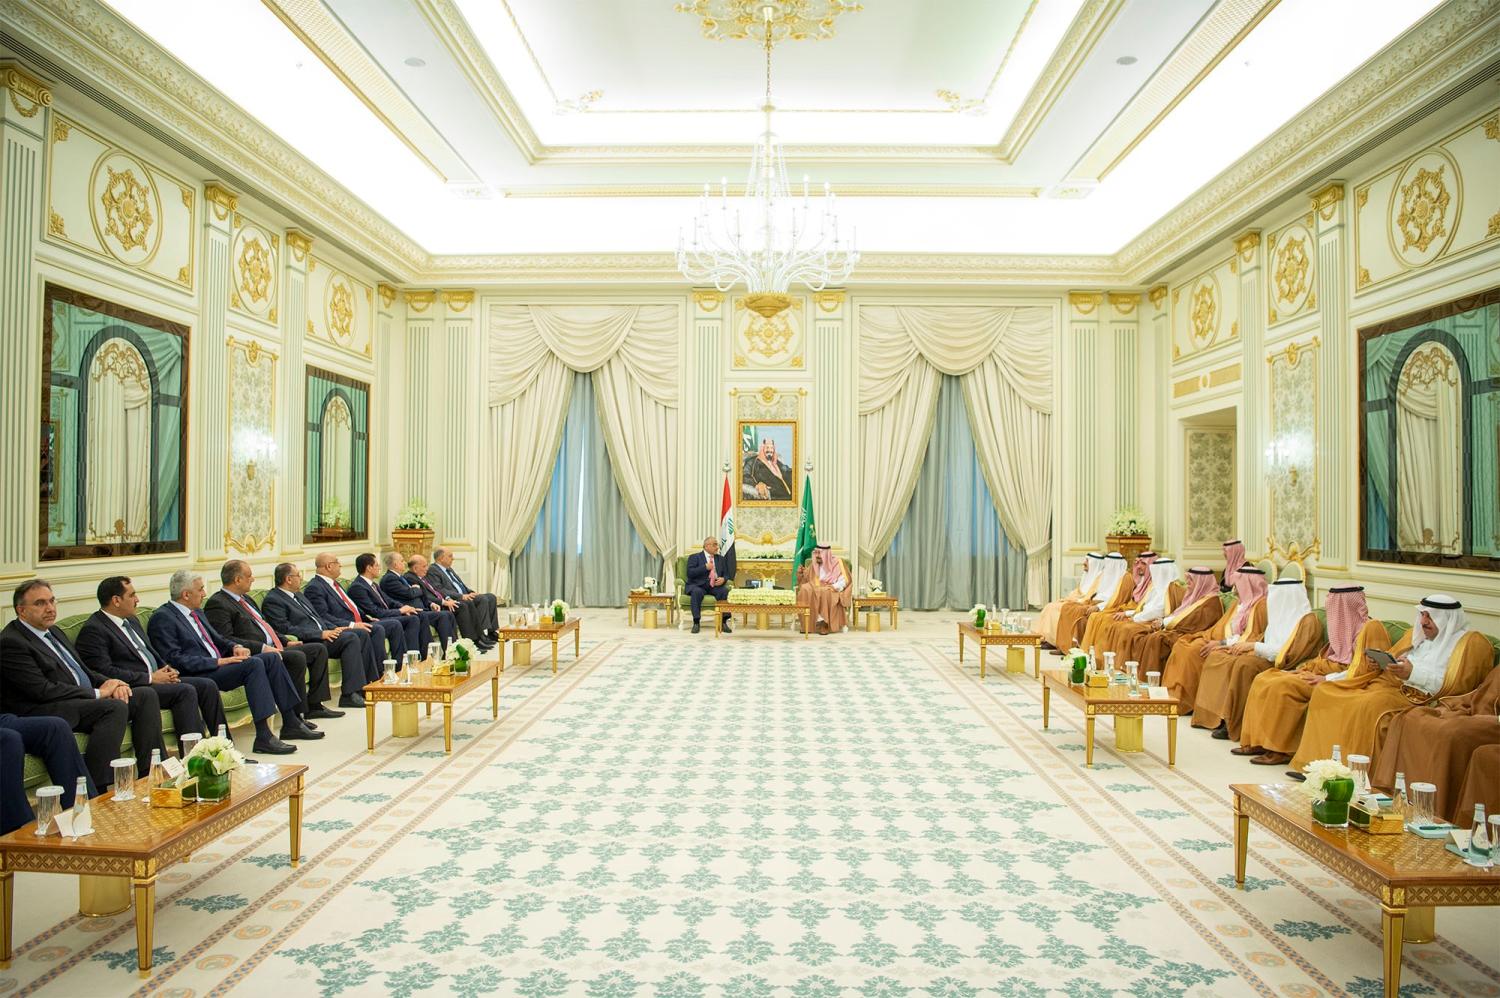 Saudi Arabia's King Salman bin Abdulaziz meets with Iraq's Prime Minister Adel Abdul Mahdi and Iraqi ministers in Riyadh, Saudi Arabia April 17, 2019. Bandar Algaloud/Courtesy of Saudi Royal Court/Handout via REUTERS ATTENTION EDITORS - THIS PICTURE WAS PROVIDED BY A THIRD PARTY. - RC1A0CFF1D20